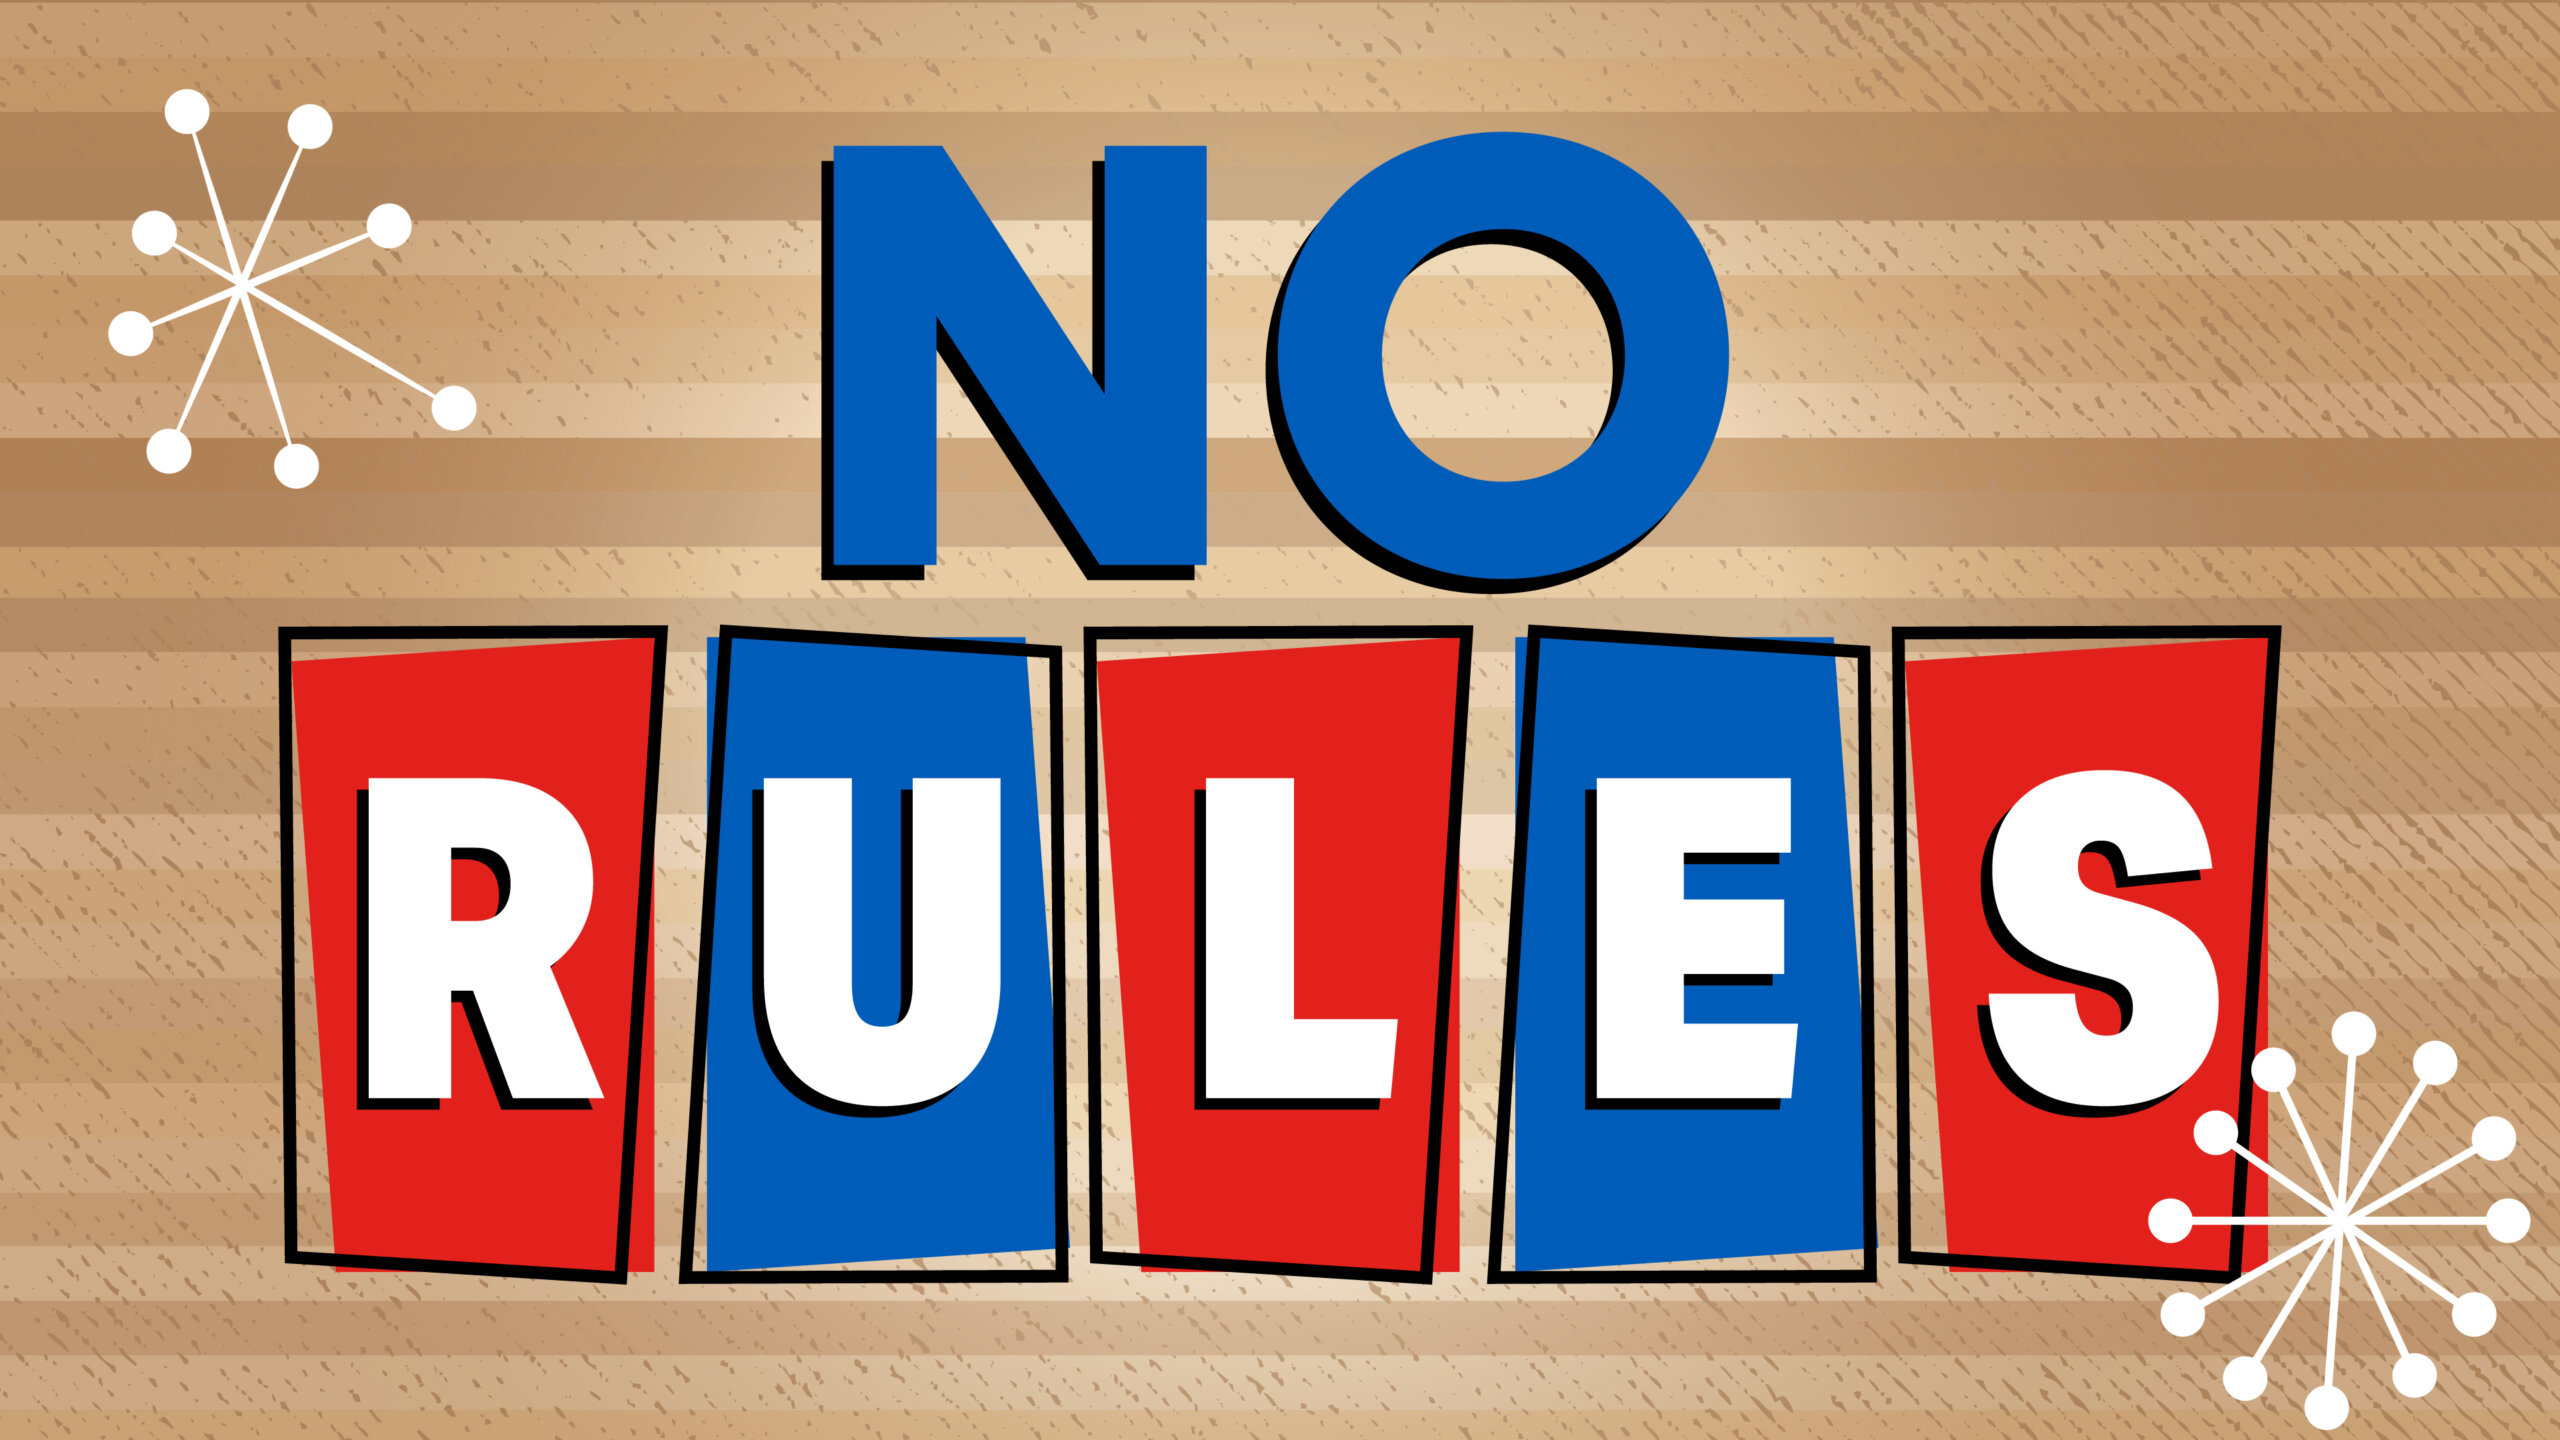 Image with faux wood paneling background and text that says NO RULES.